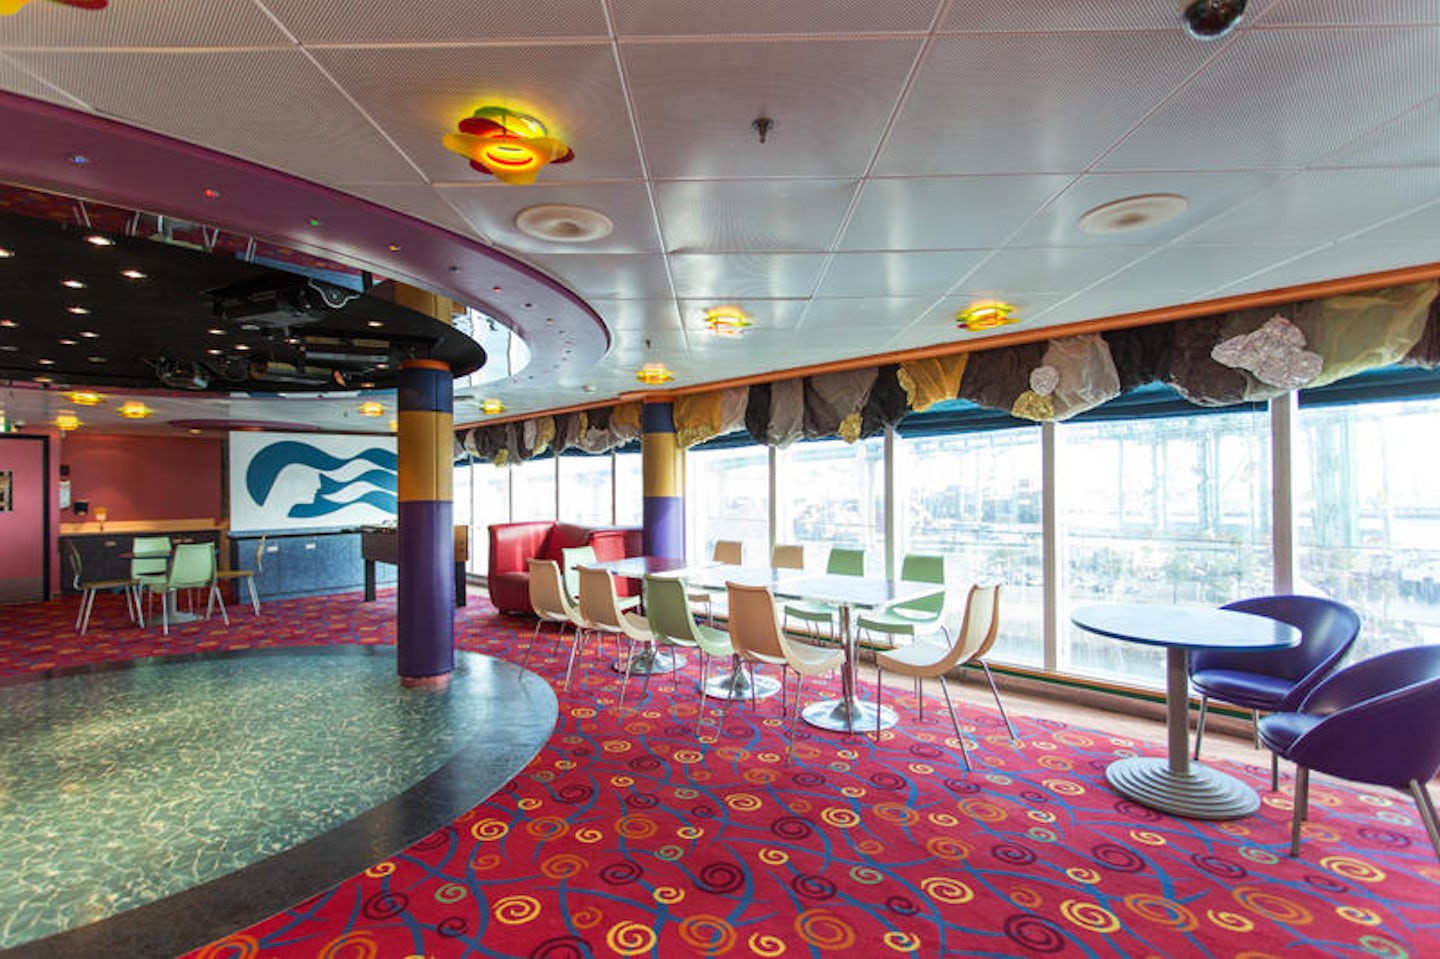 Fun Zone Youth Center on Coral Princess